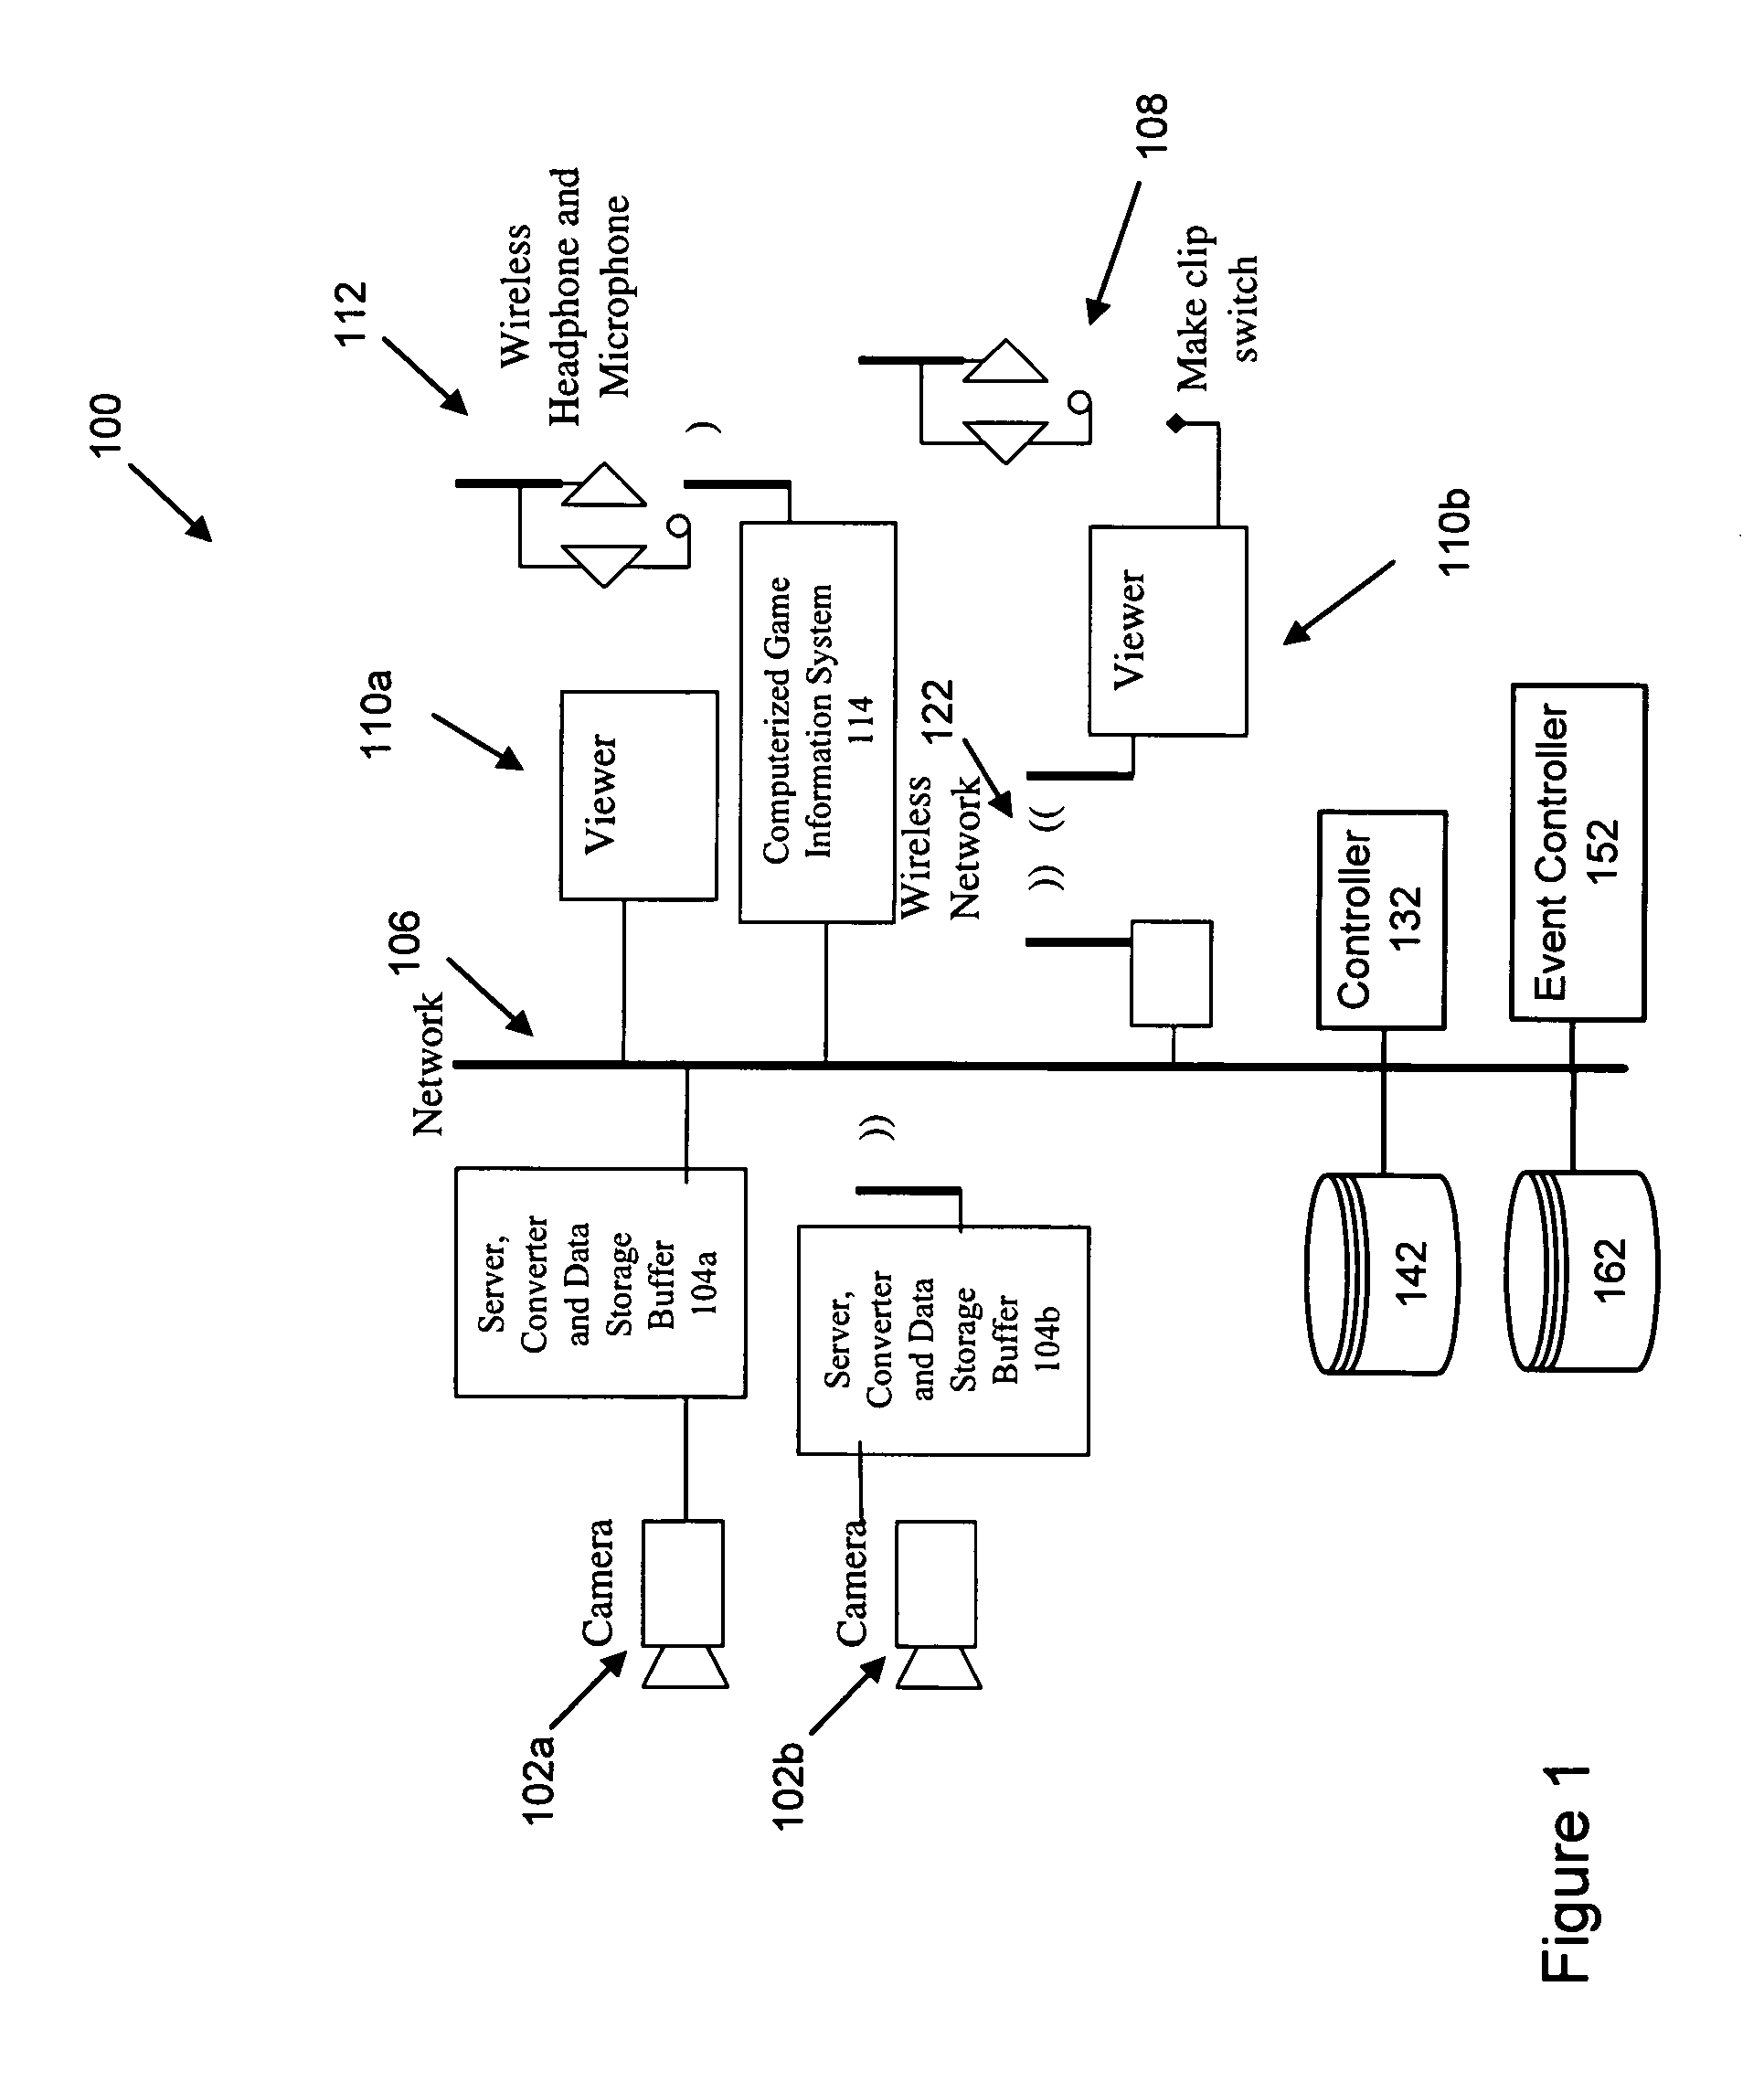 System and method of video capture for sports applications